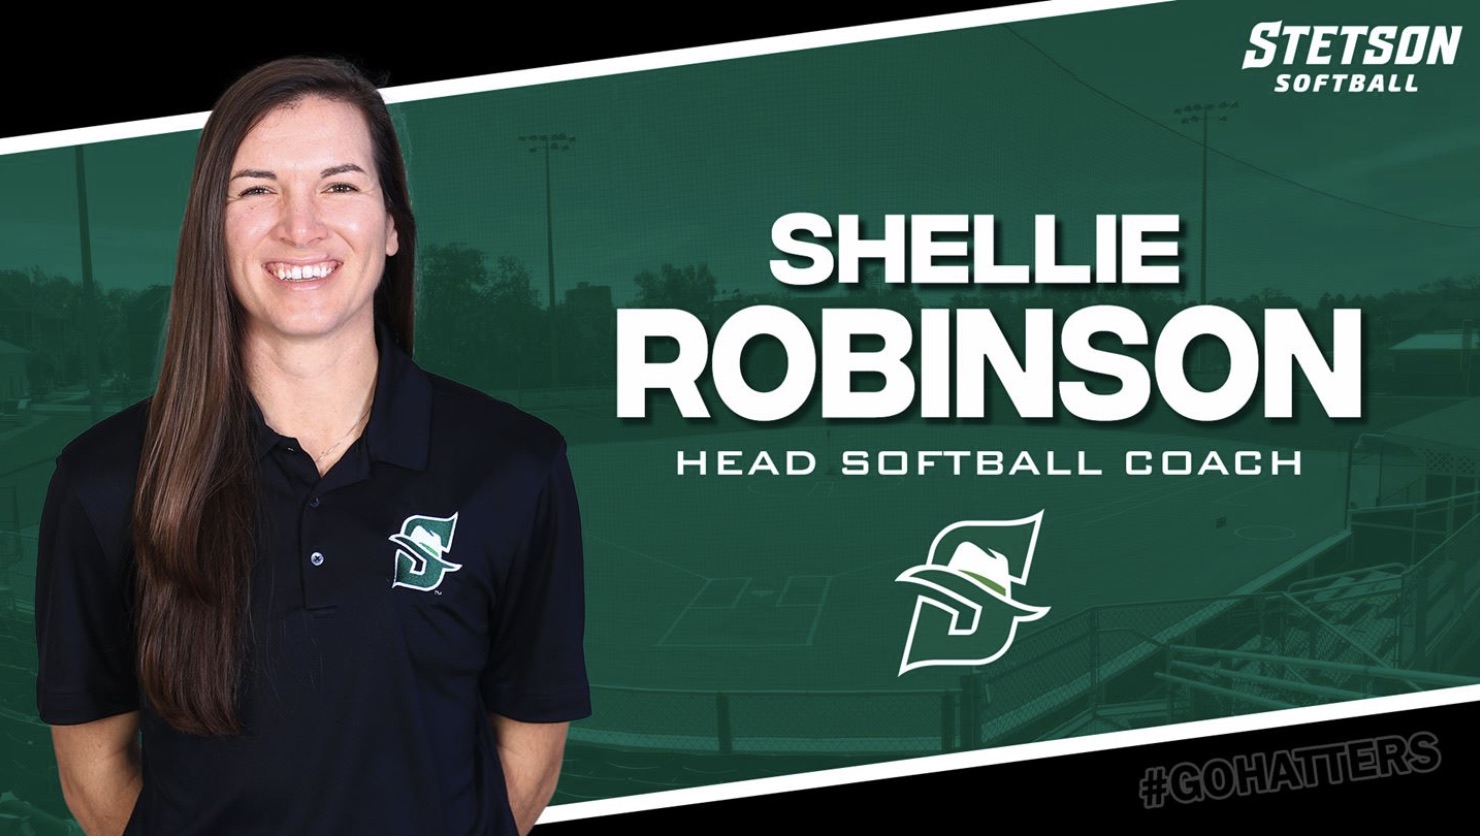 Graphic with a picture of Shellie Robinson and her name as new head softball coach